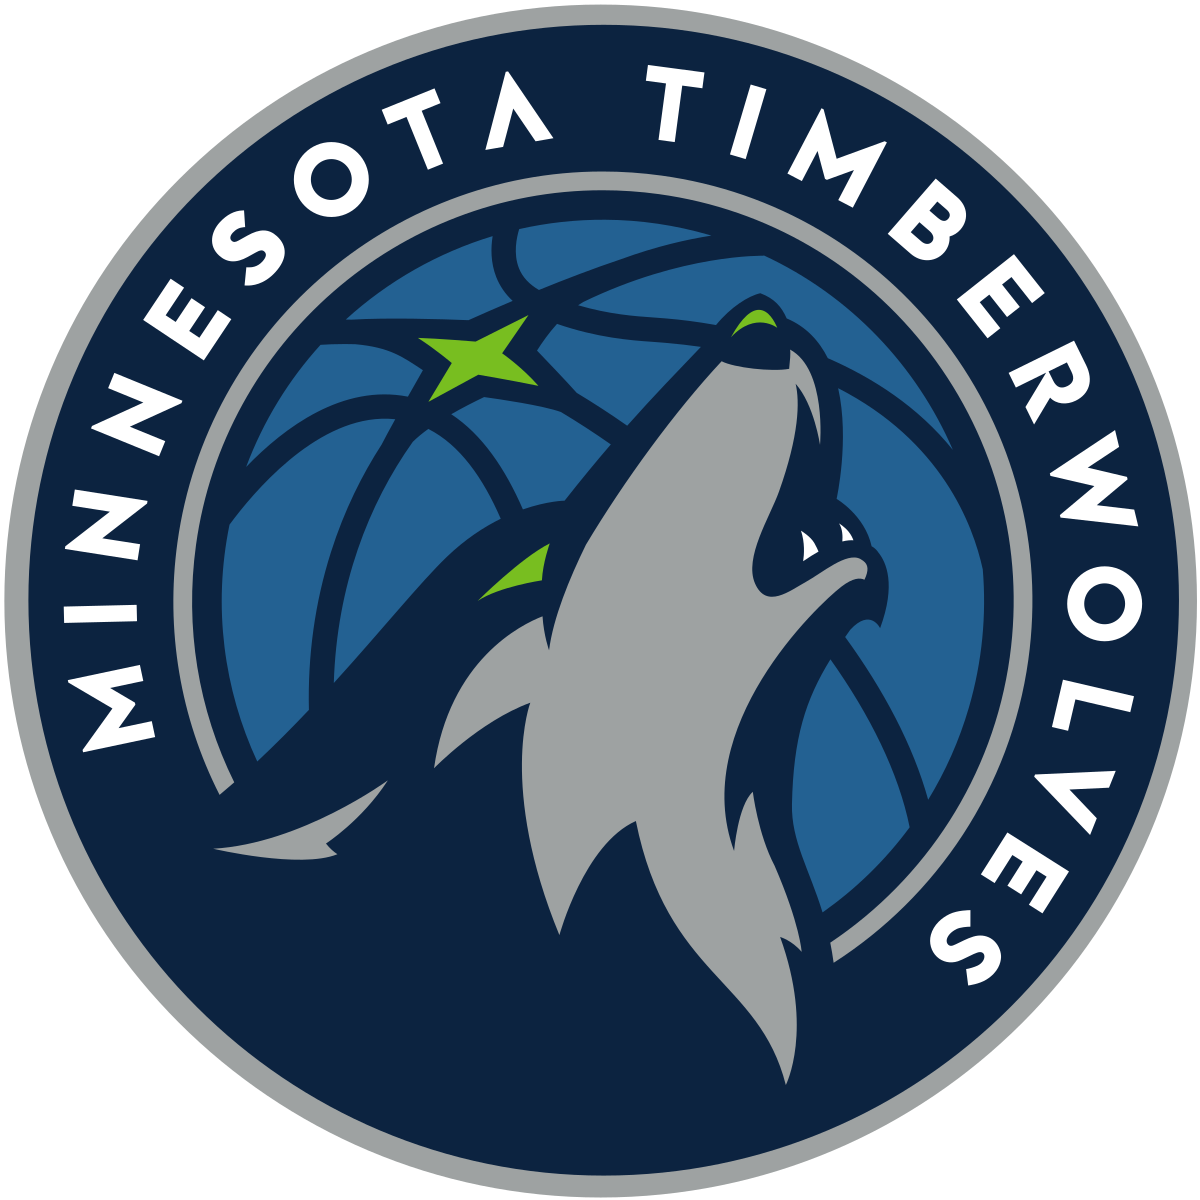 Minnesota Timberwolves May Be Up For Sale